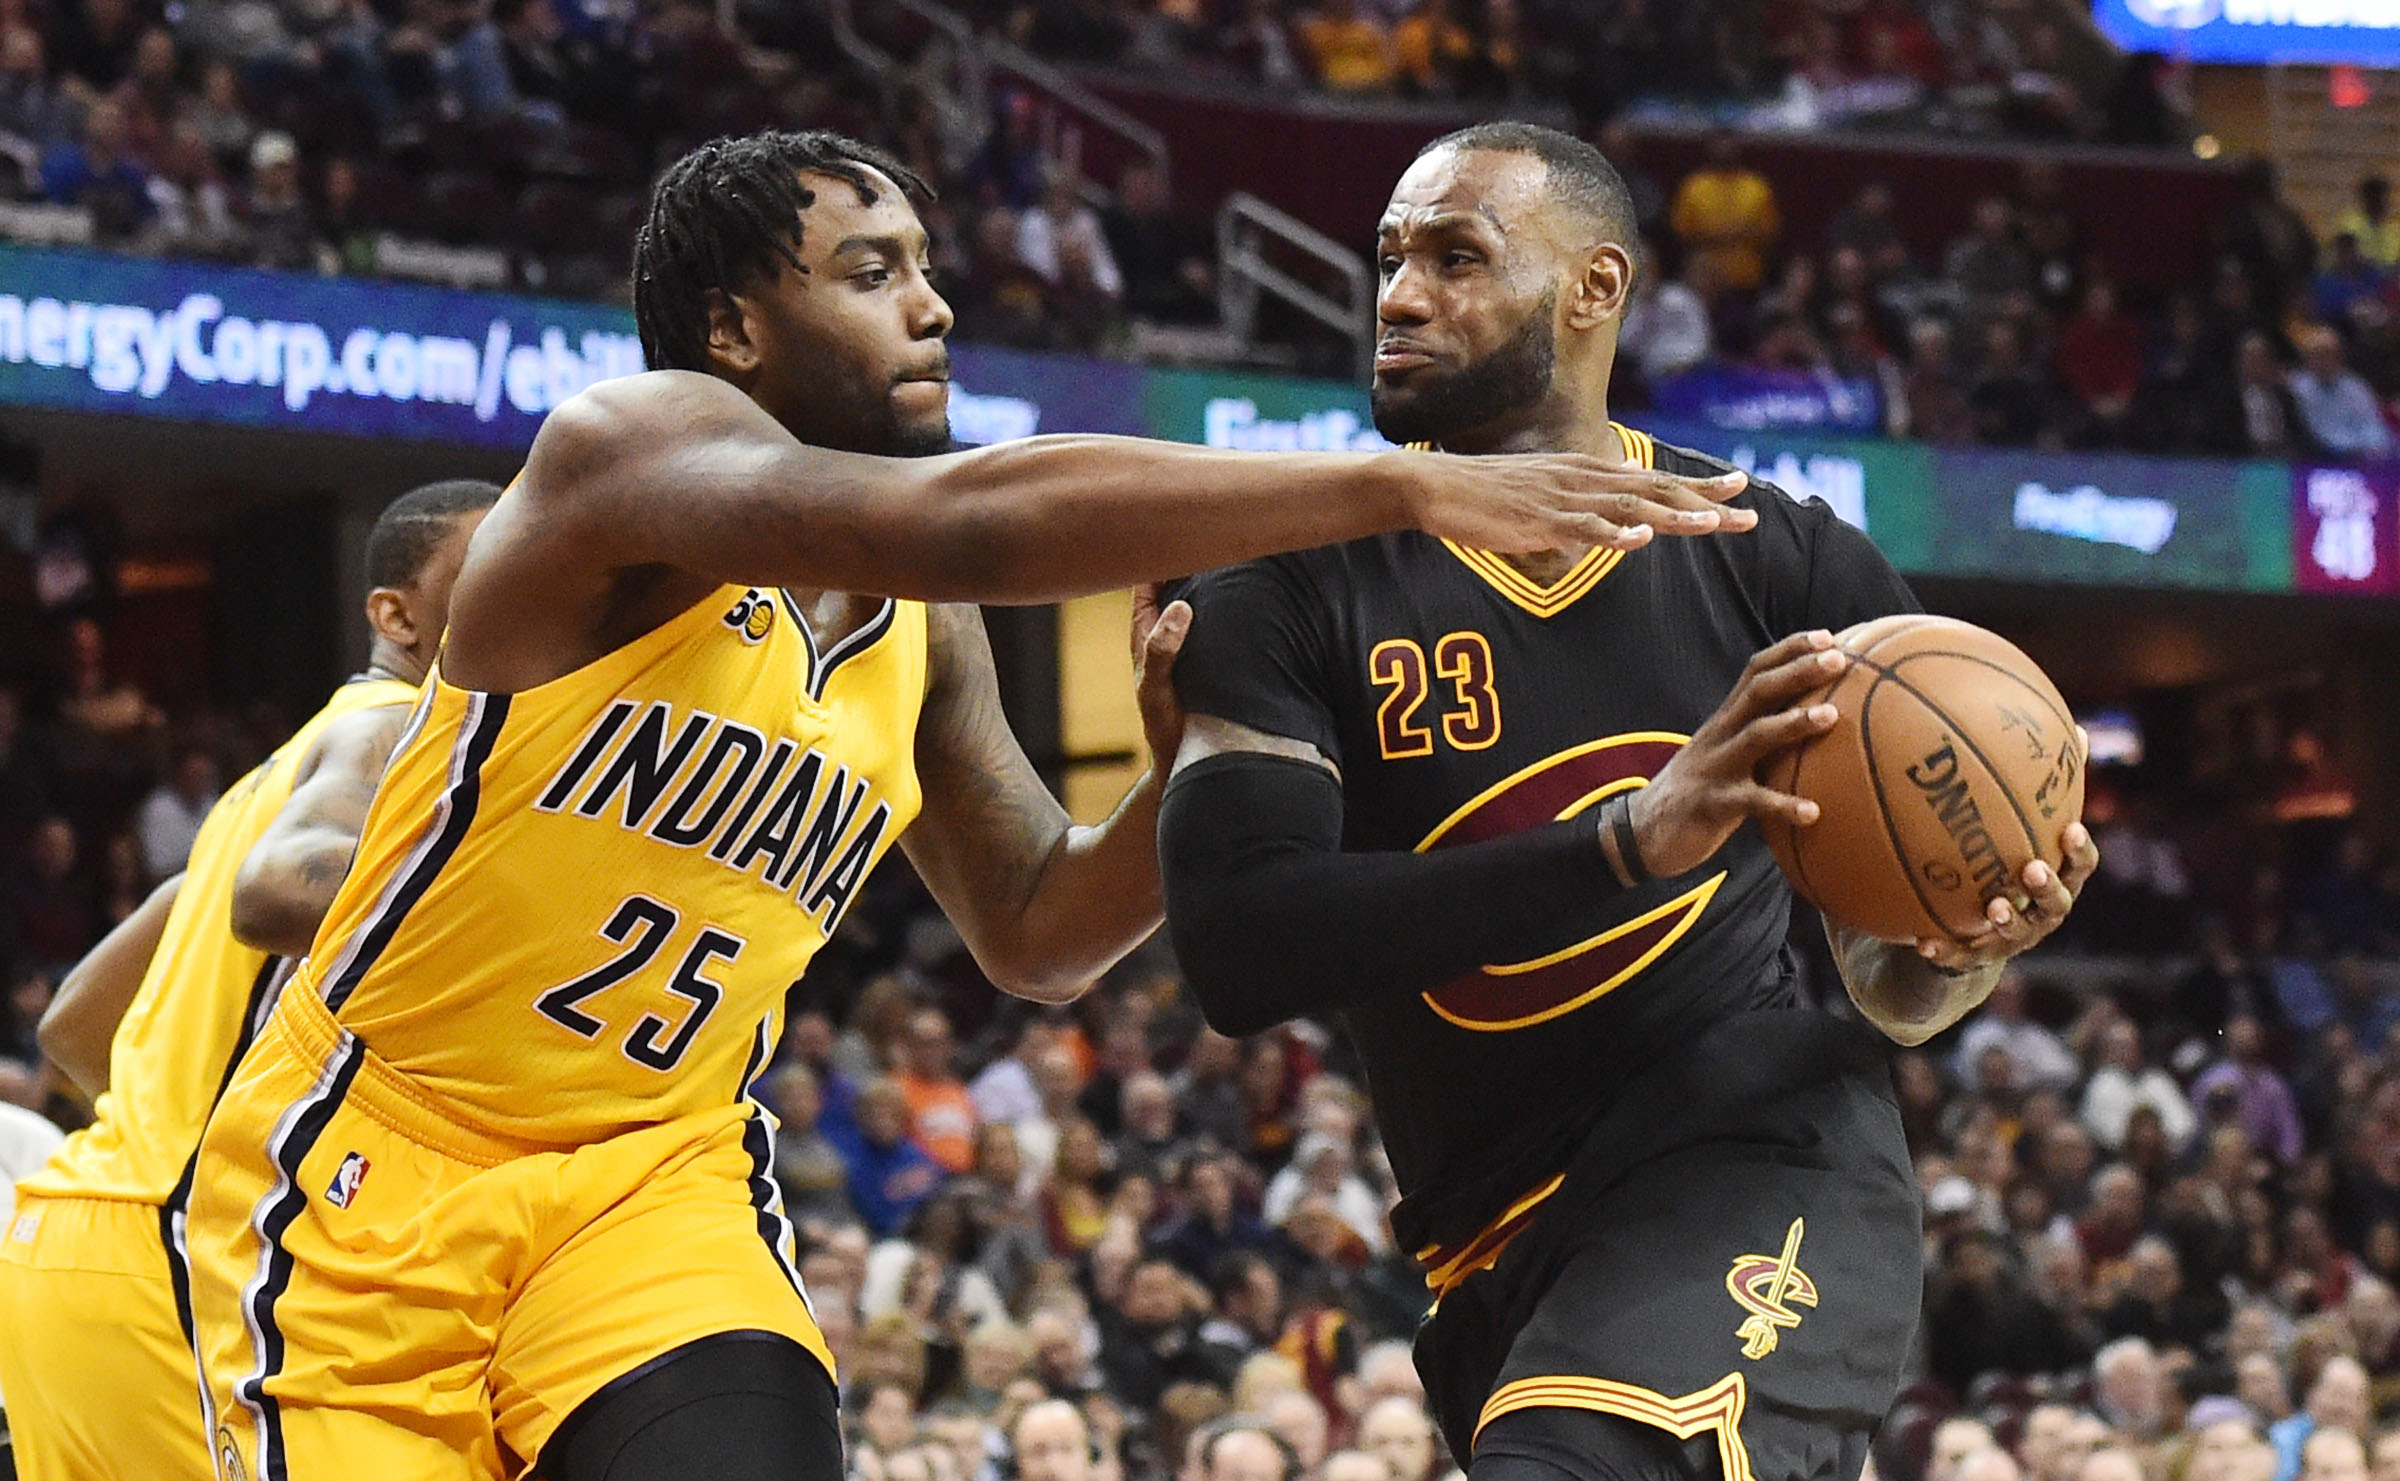 Pacers at Cavaliers live stream: How to watch online2400 x 1481